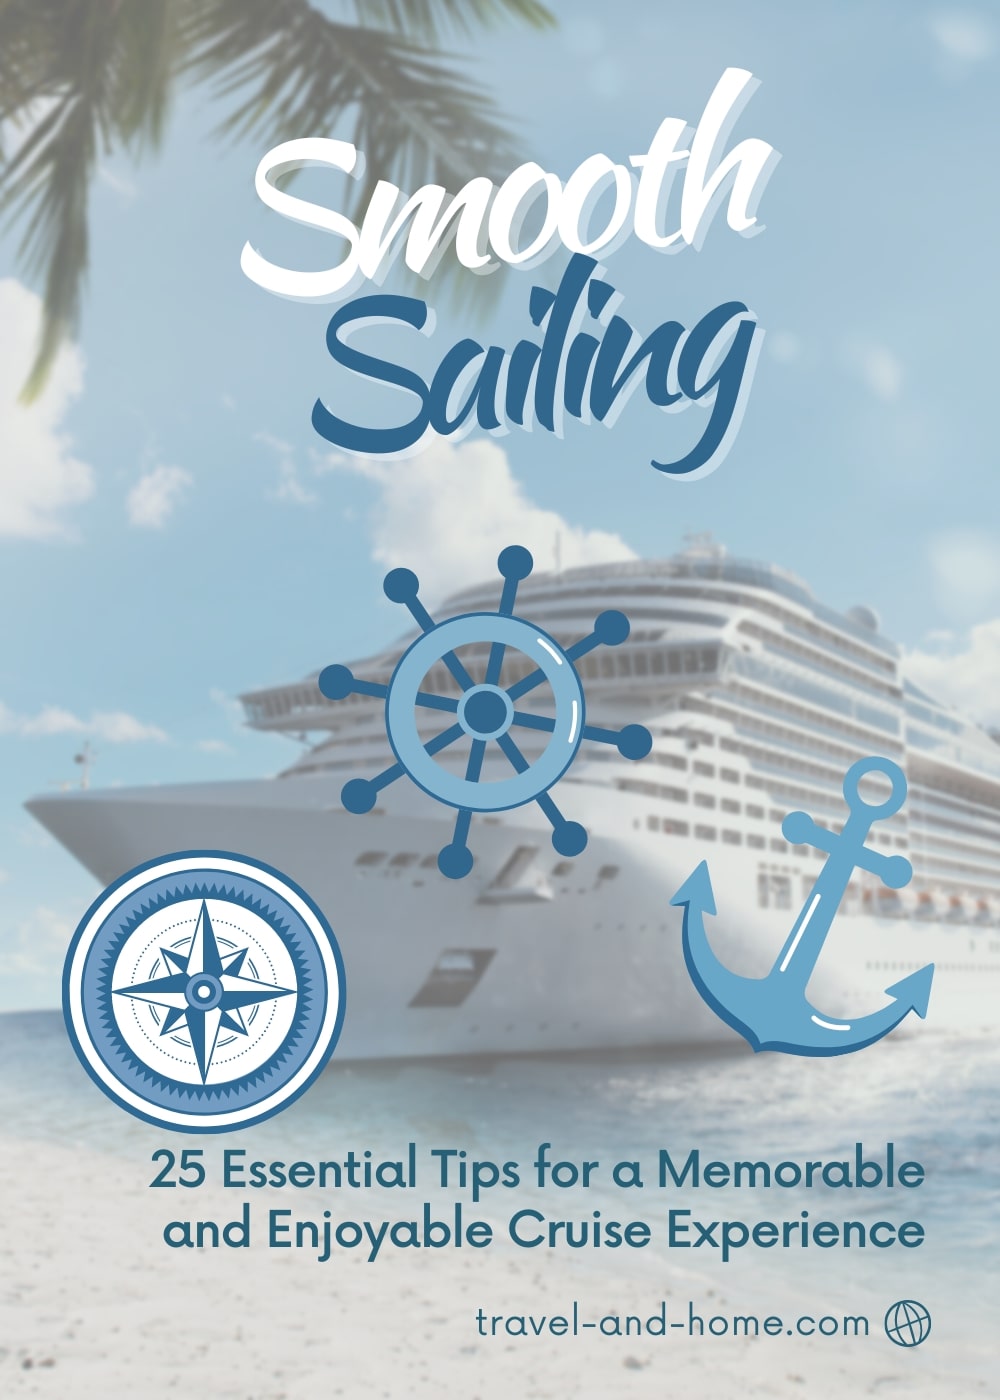 Smooth Sailing, Essential Tips for a Memorable and Enjoyable Cruise Experience, Cruises with Viator, Cruise Critic, Cruise Direct, Get Your Guide min